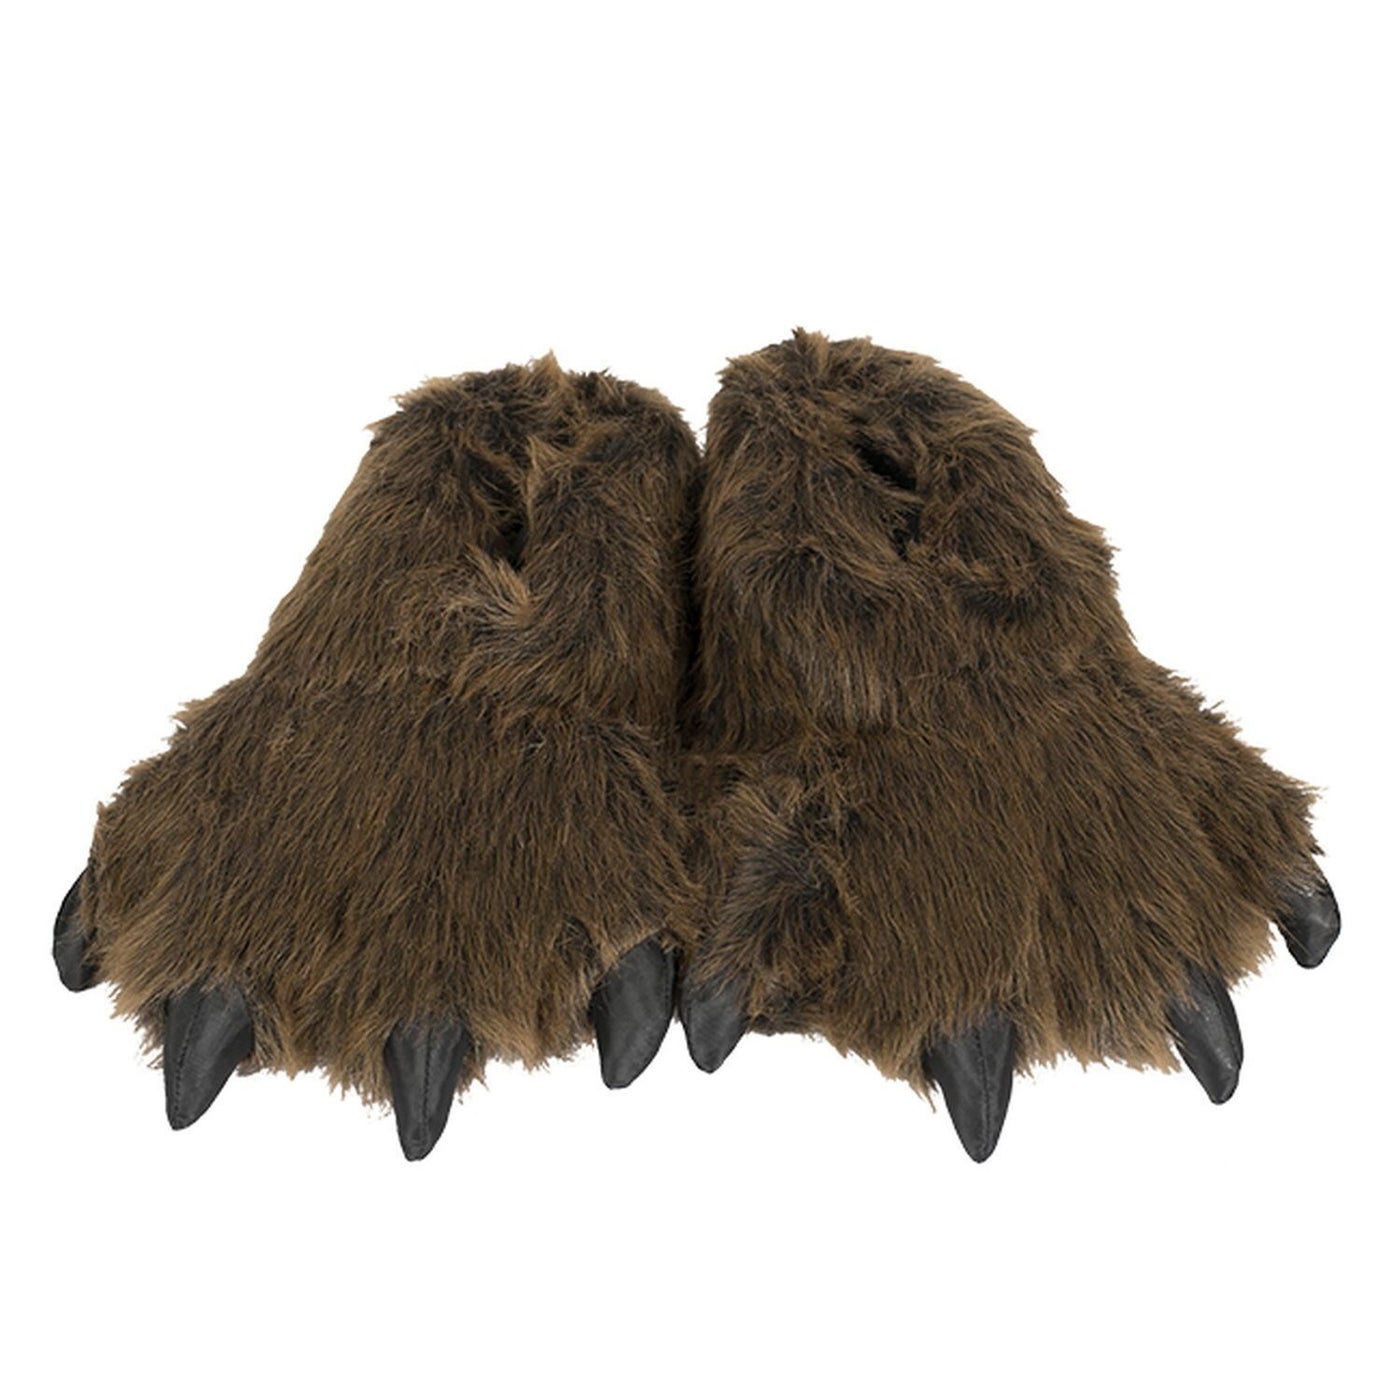 15" Furry Grizzly Bear Slippers - accessories Link Companies